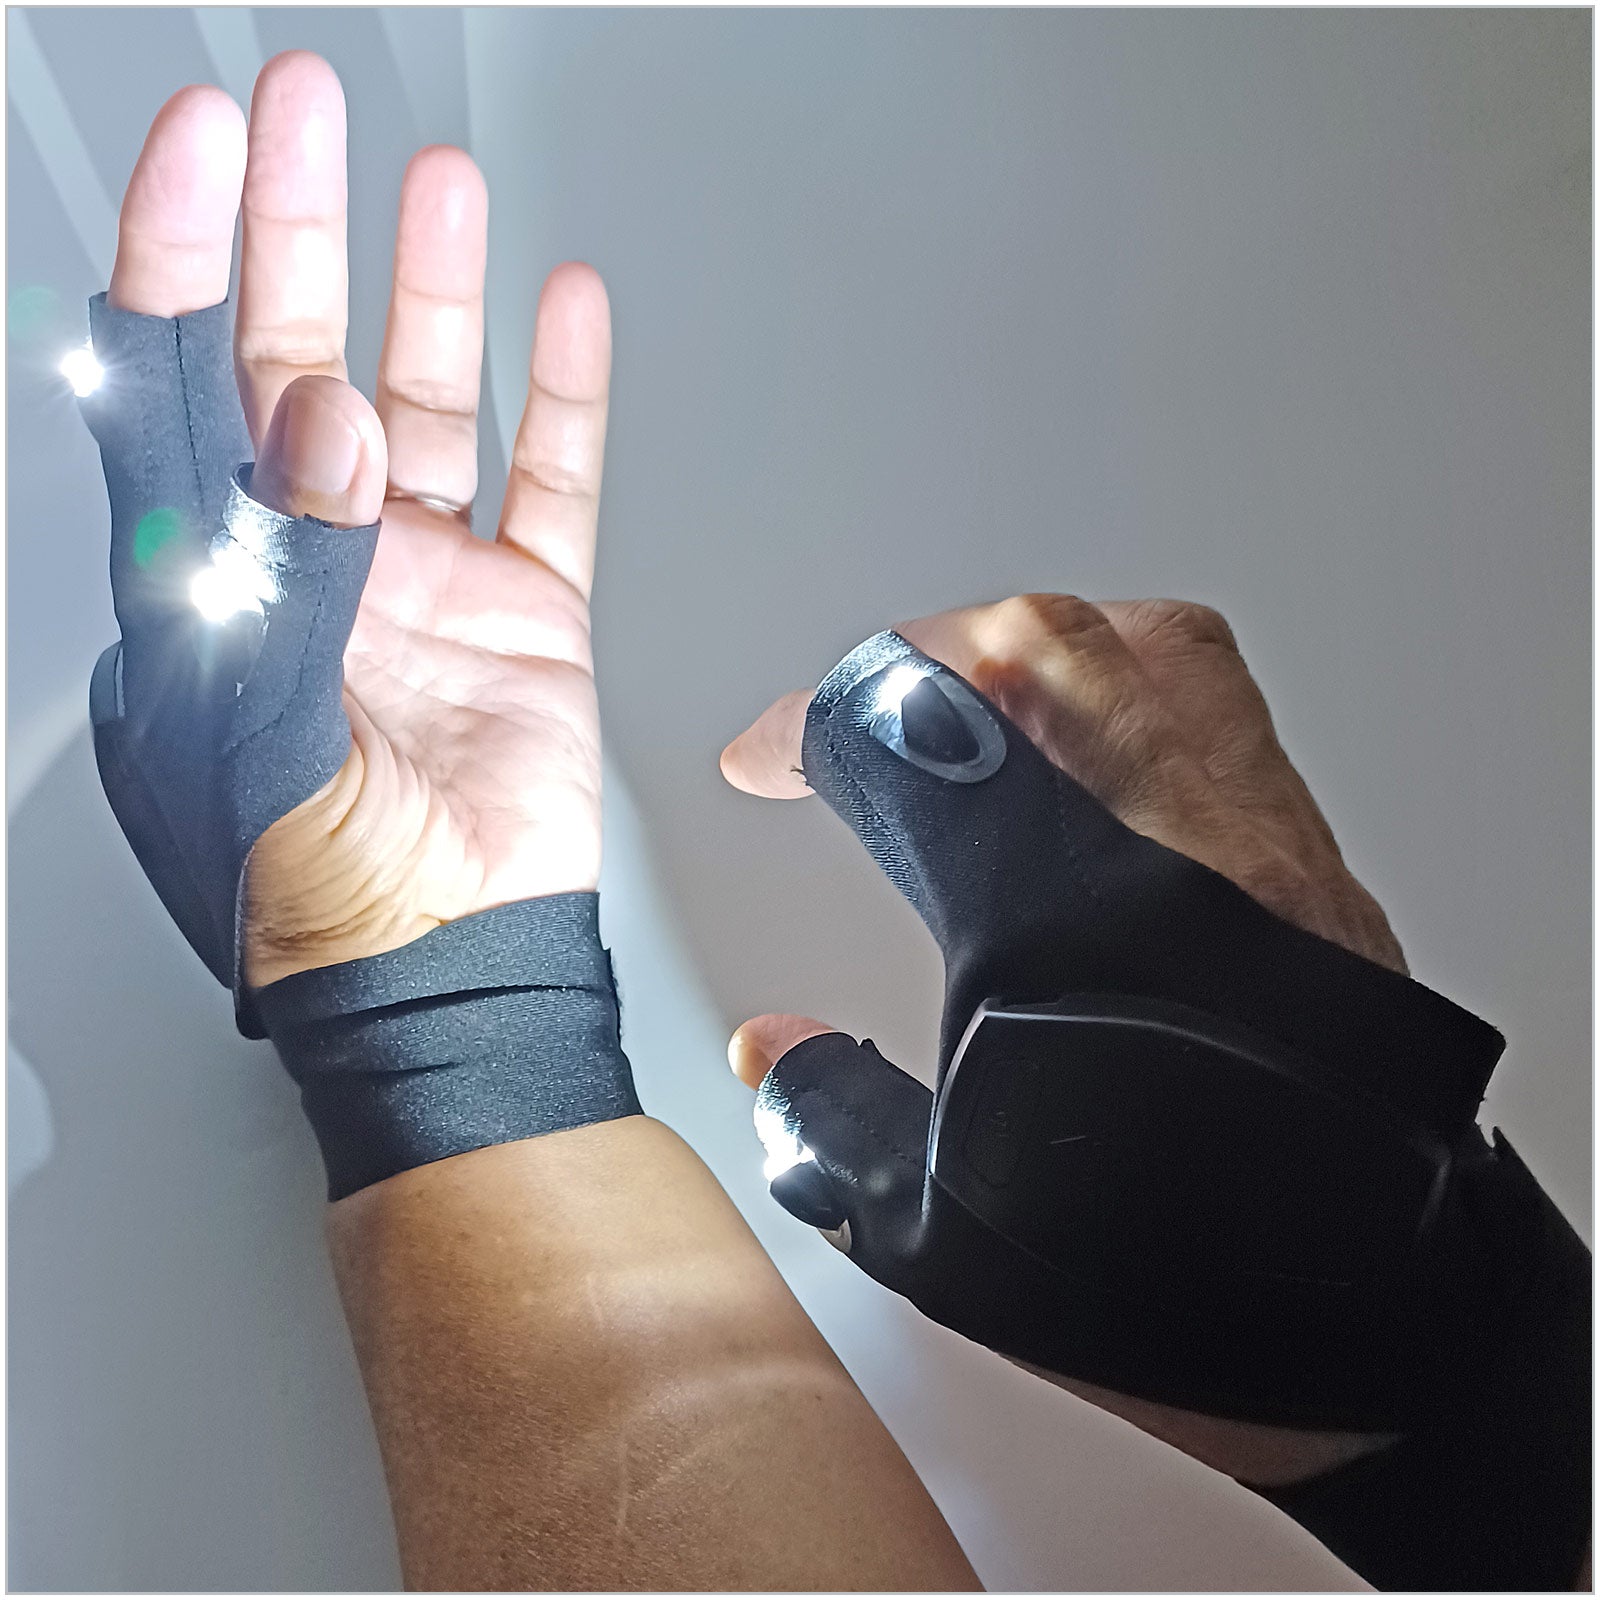 HandyBRYTE Glove - Mounted LED Light System by Micro - Mark